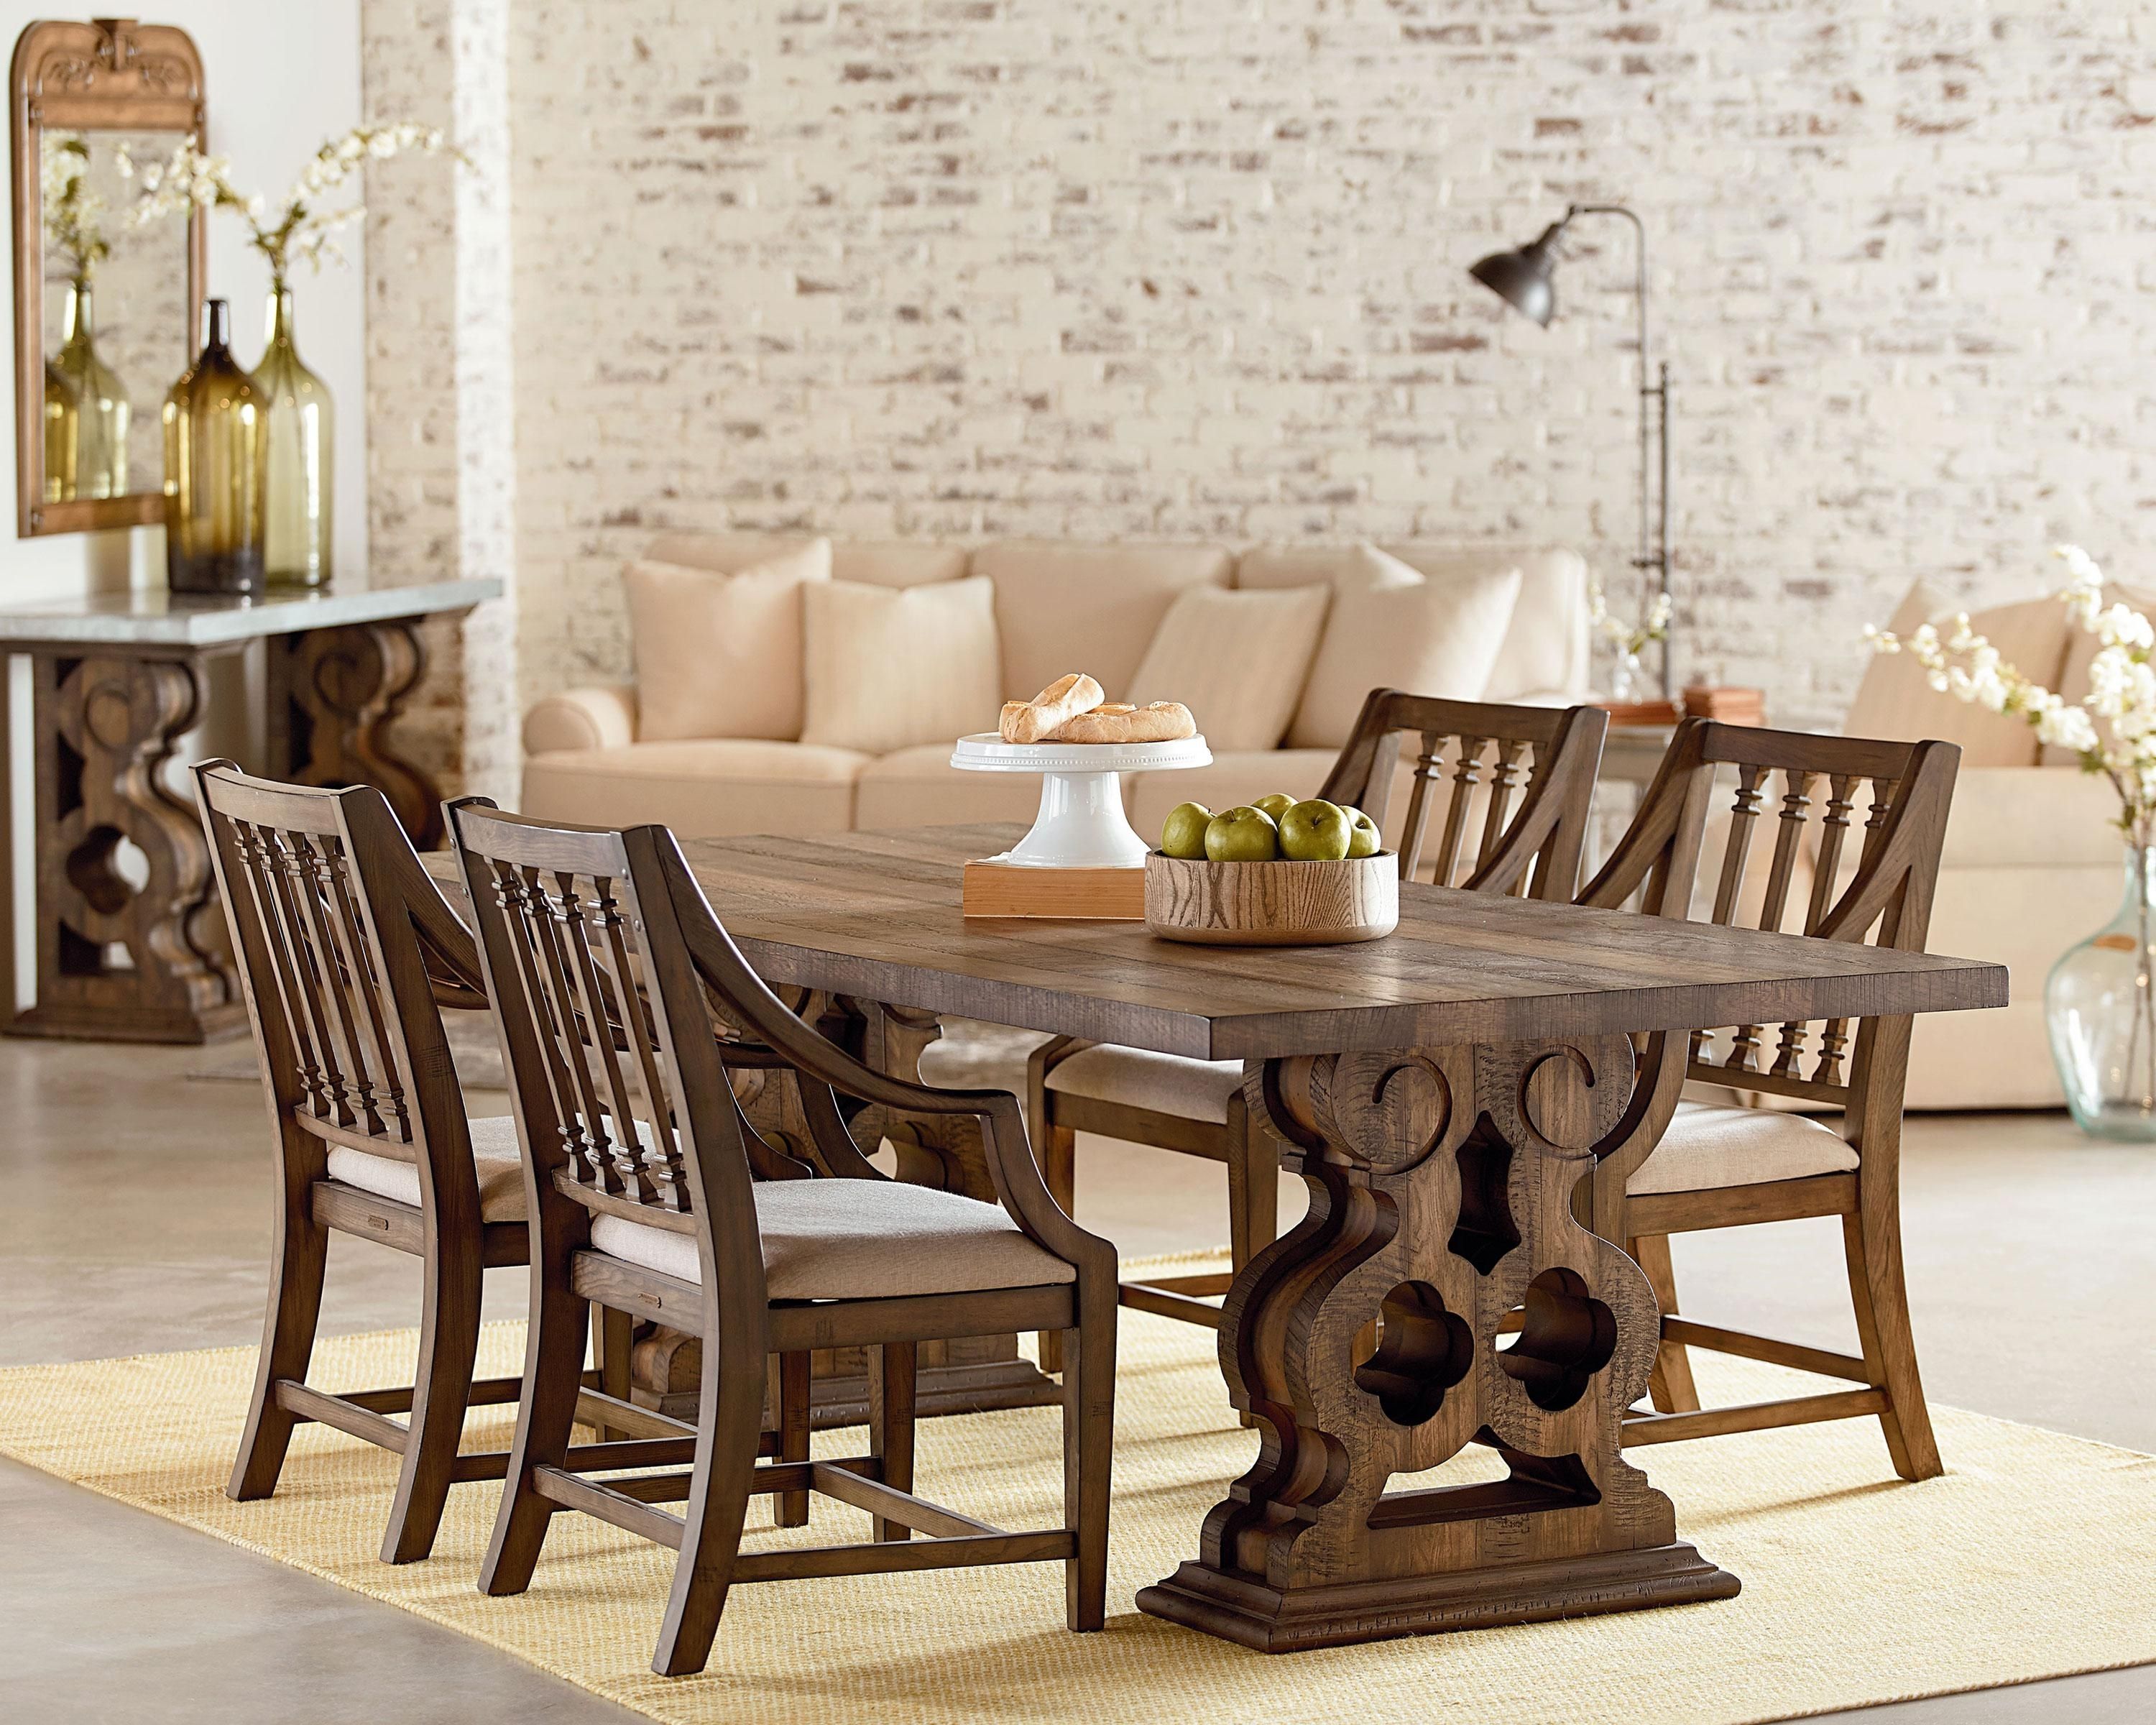 Double Pedestal + Revival – Magnolia Home With Regard To 2018 Magnolia Home Double Pedestal Dining Tables (View 1 of 20)